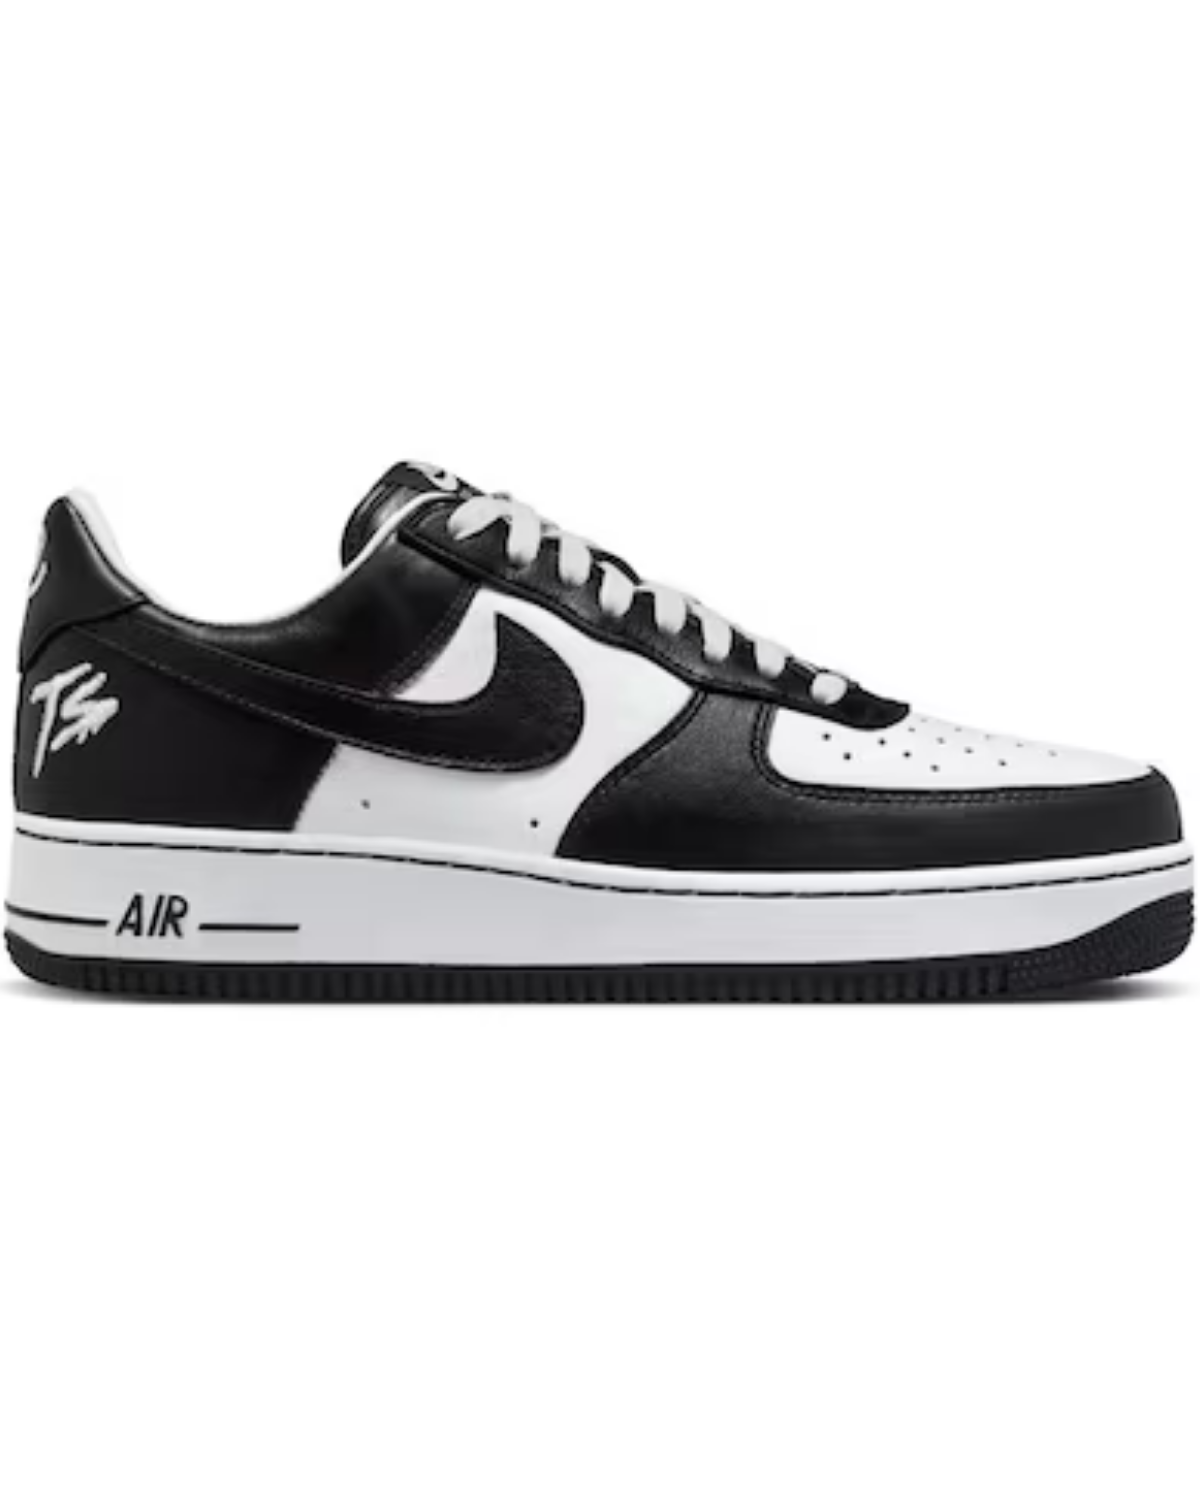 Nike Air Force 1 Low QS Terror Squad Blackout - Dropsy.Store